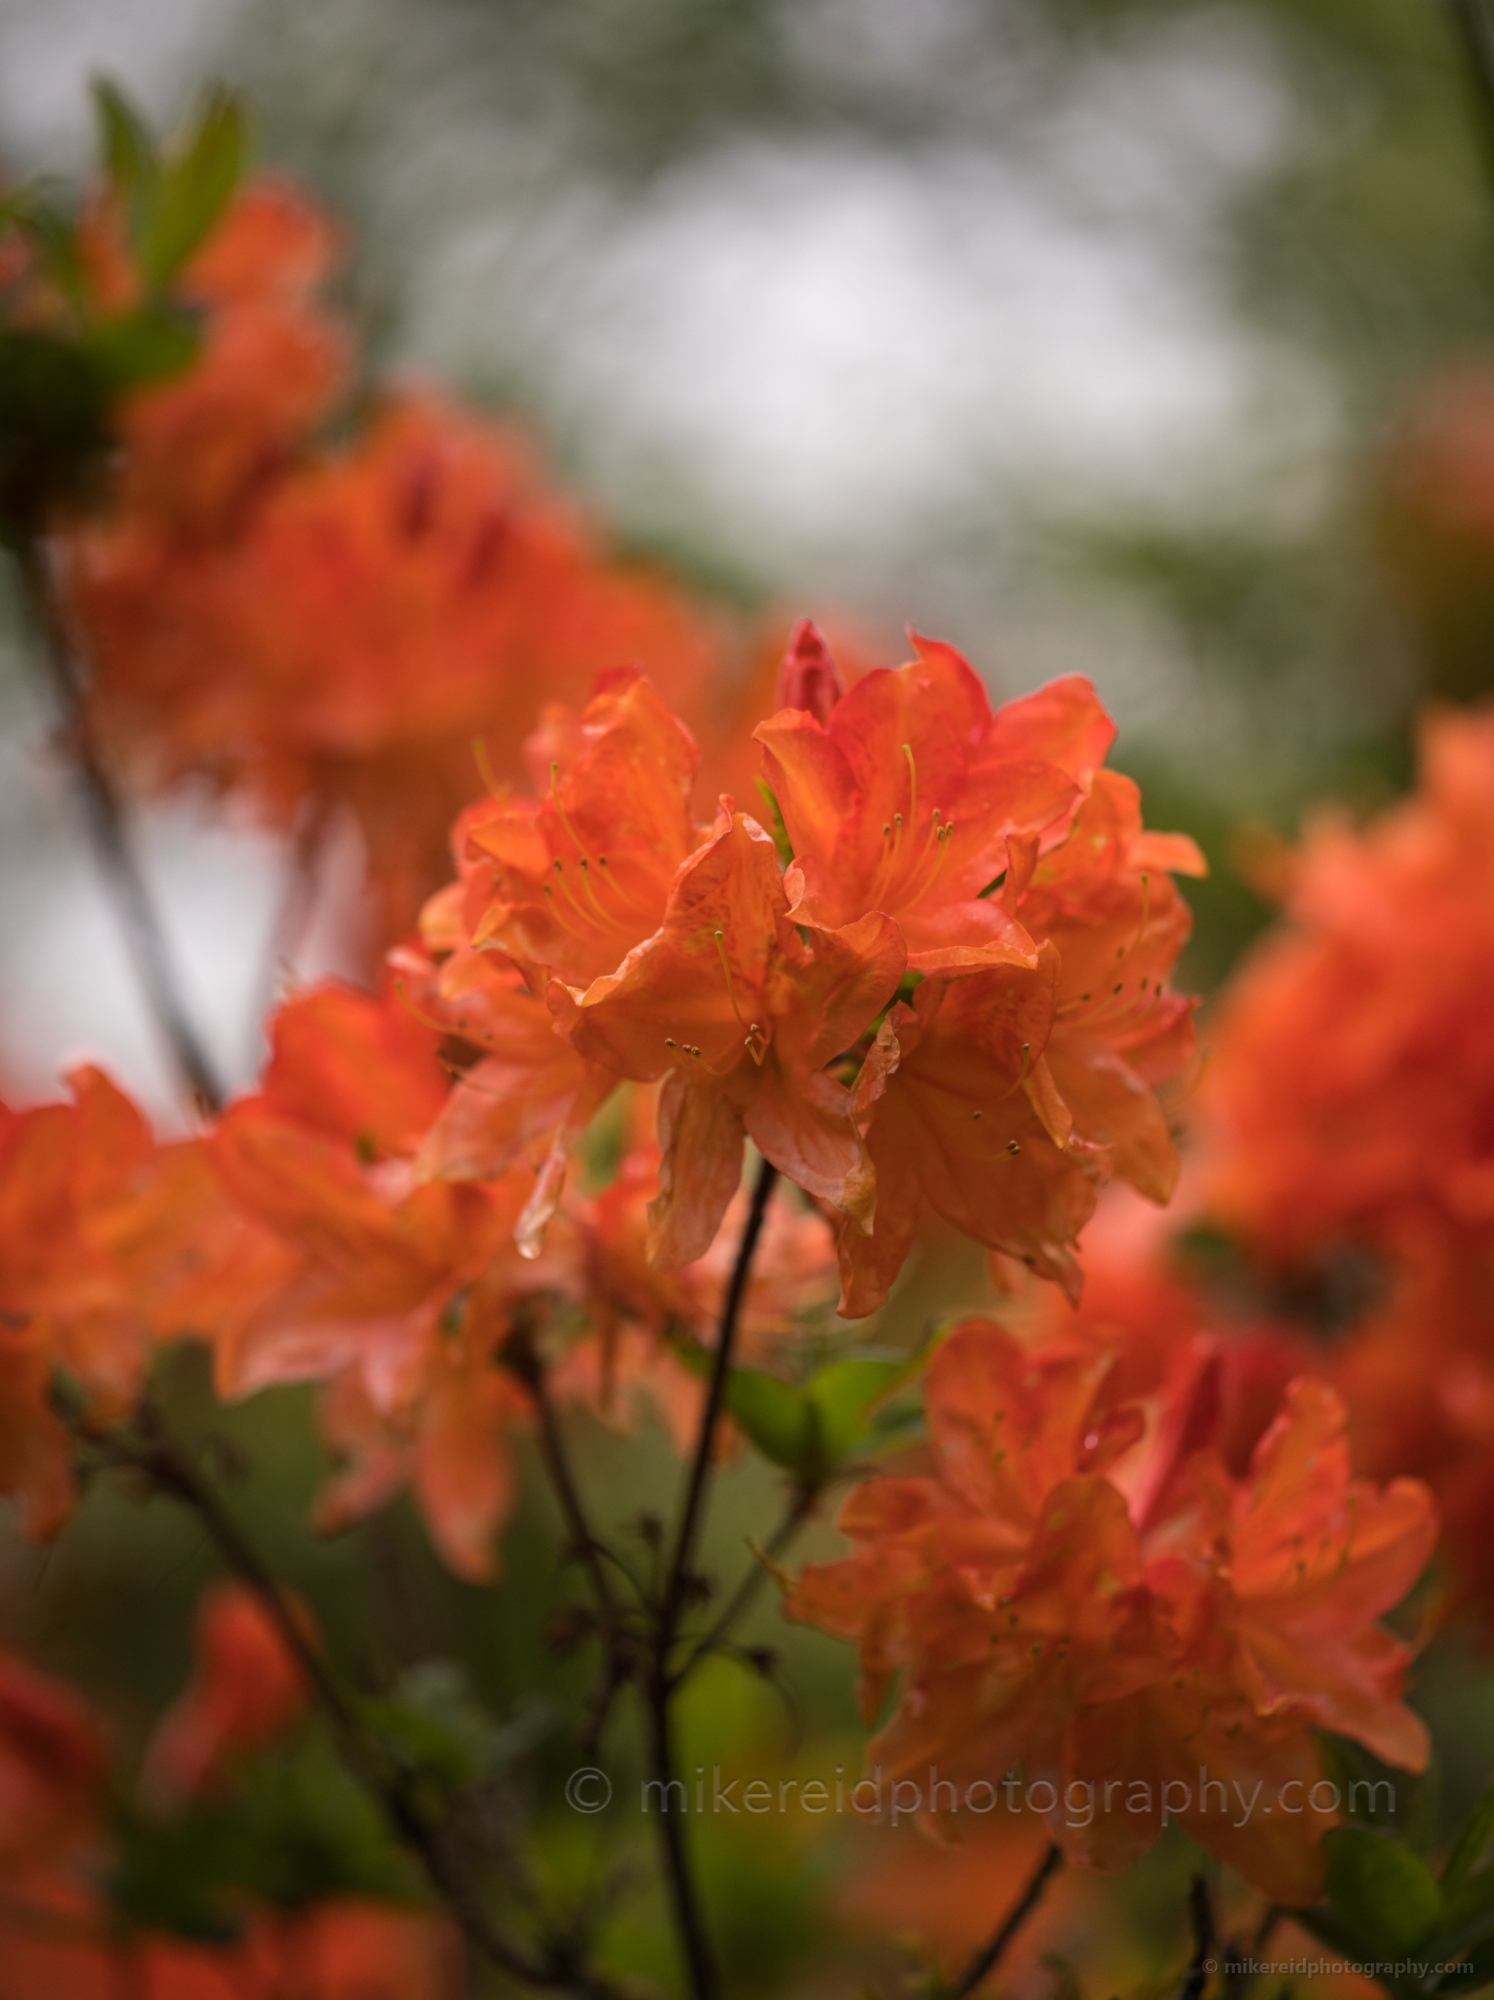 Rhododendron and Azaleas Photography Orange Delicate Blossoms.jpg 